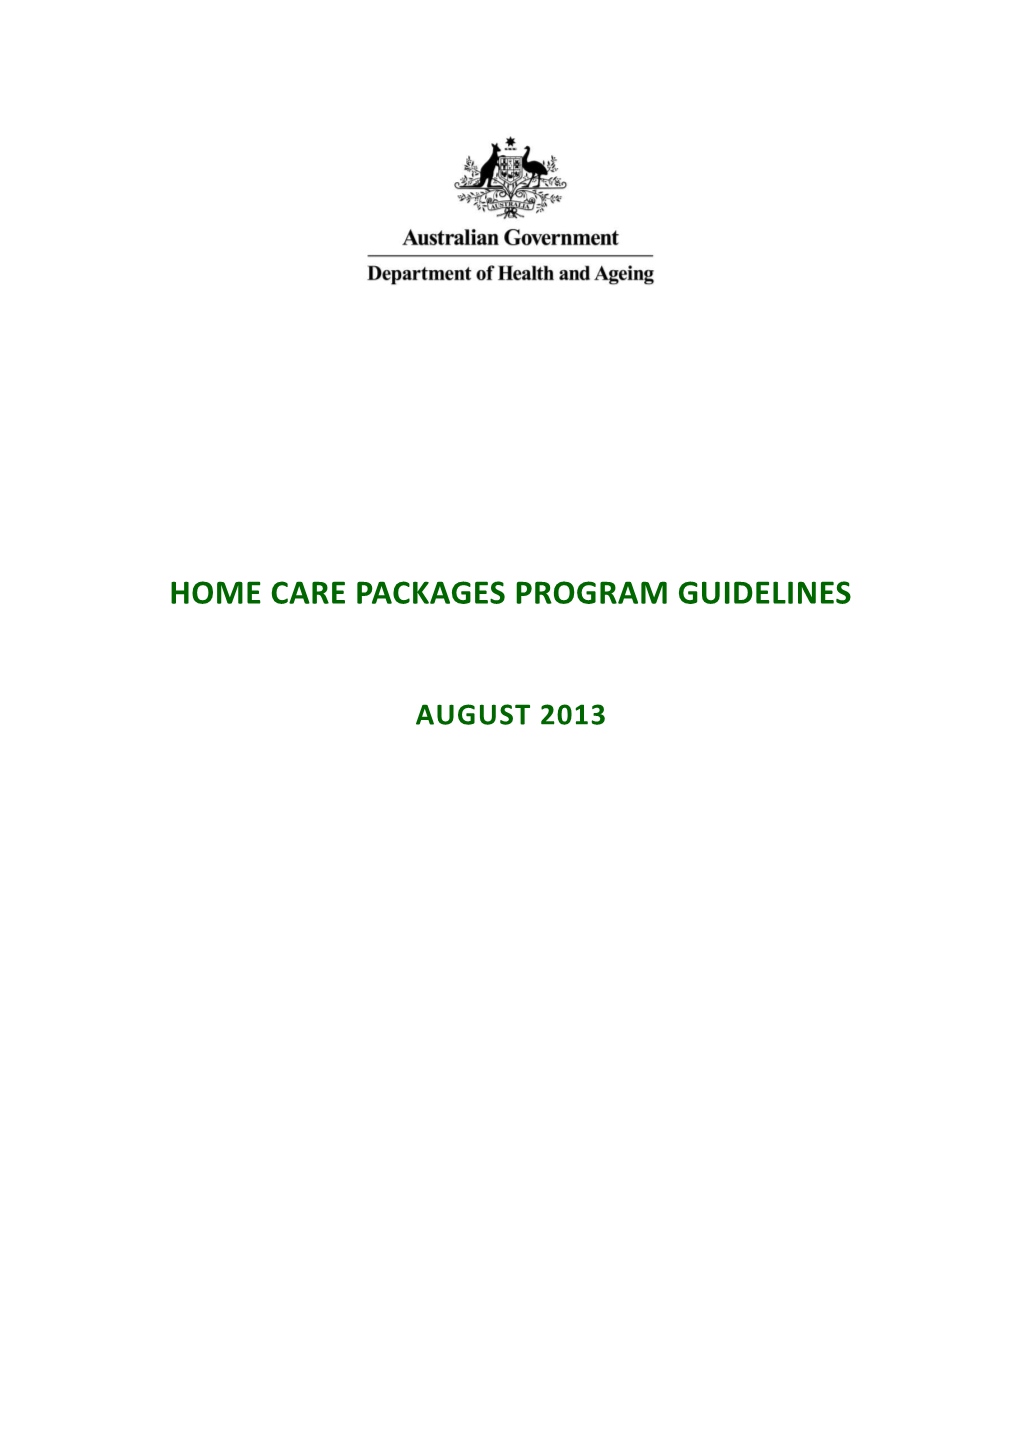 Home Care Packages Program Guidelines